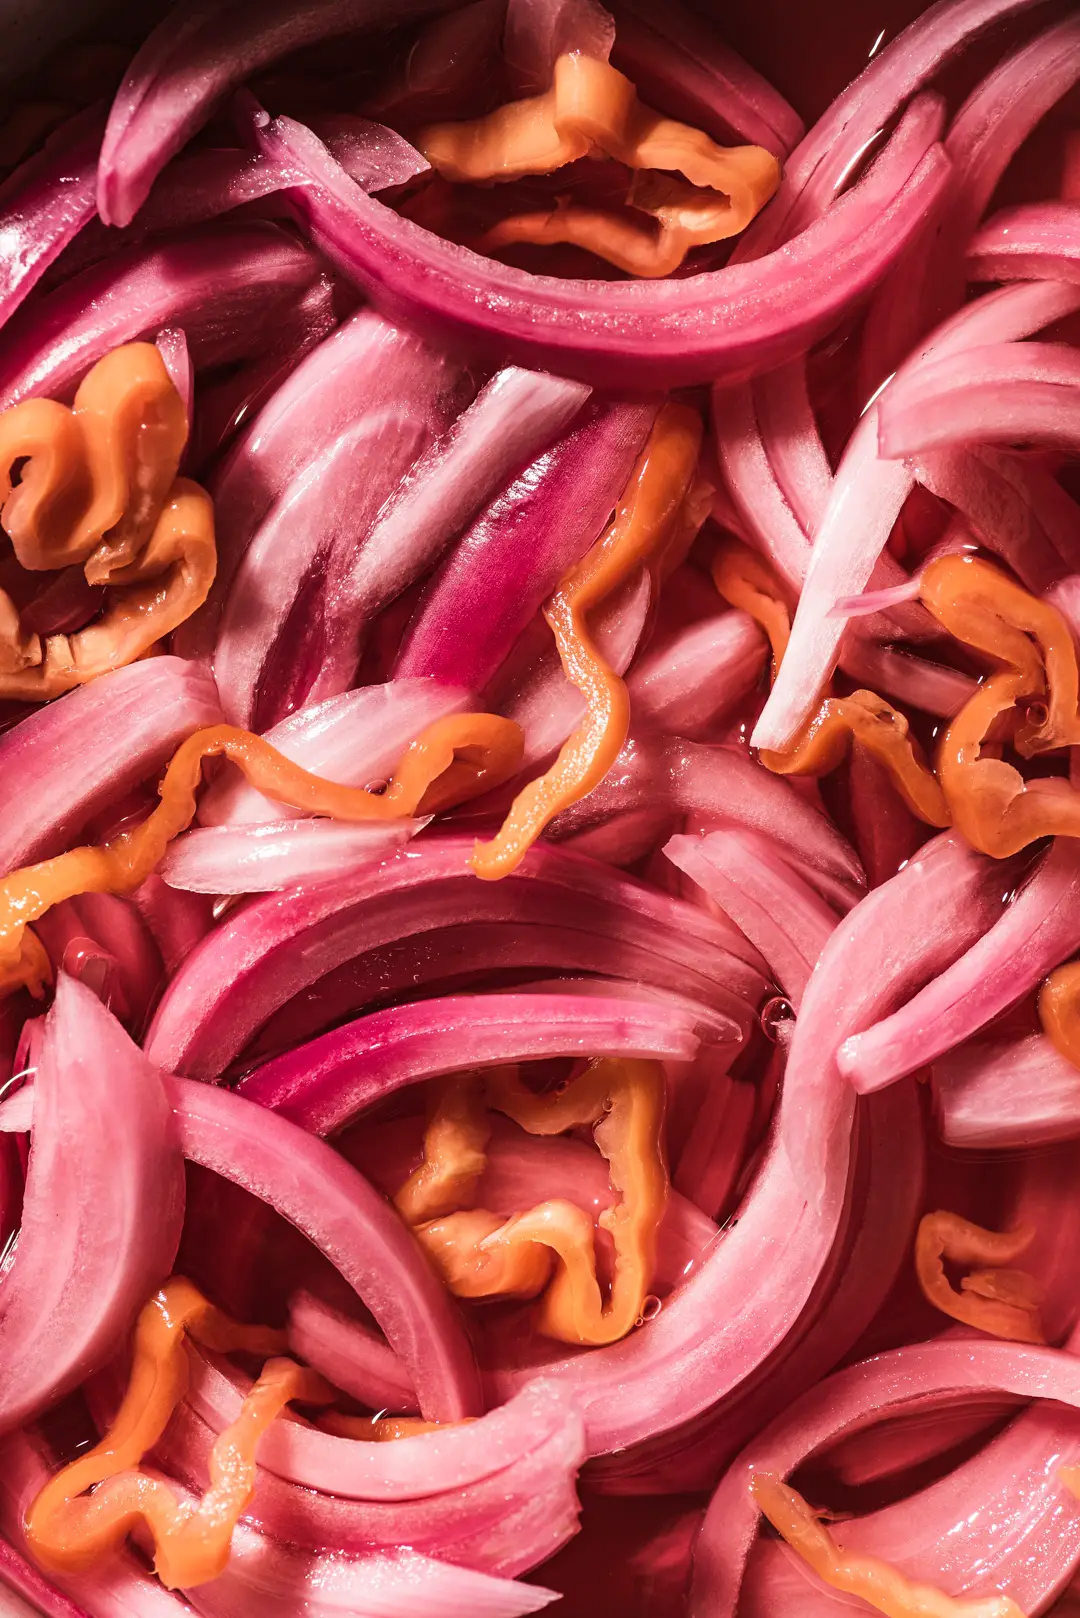 pickled red onion close up | photography by: bella karragiannidis